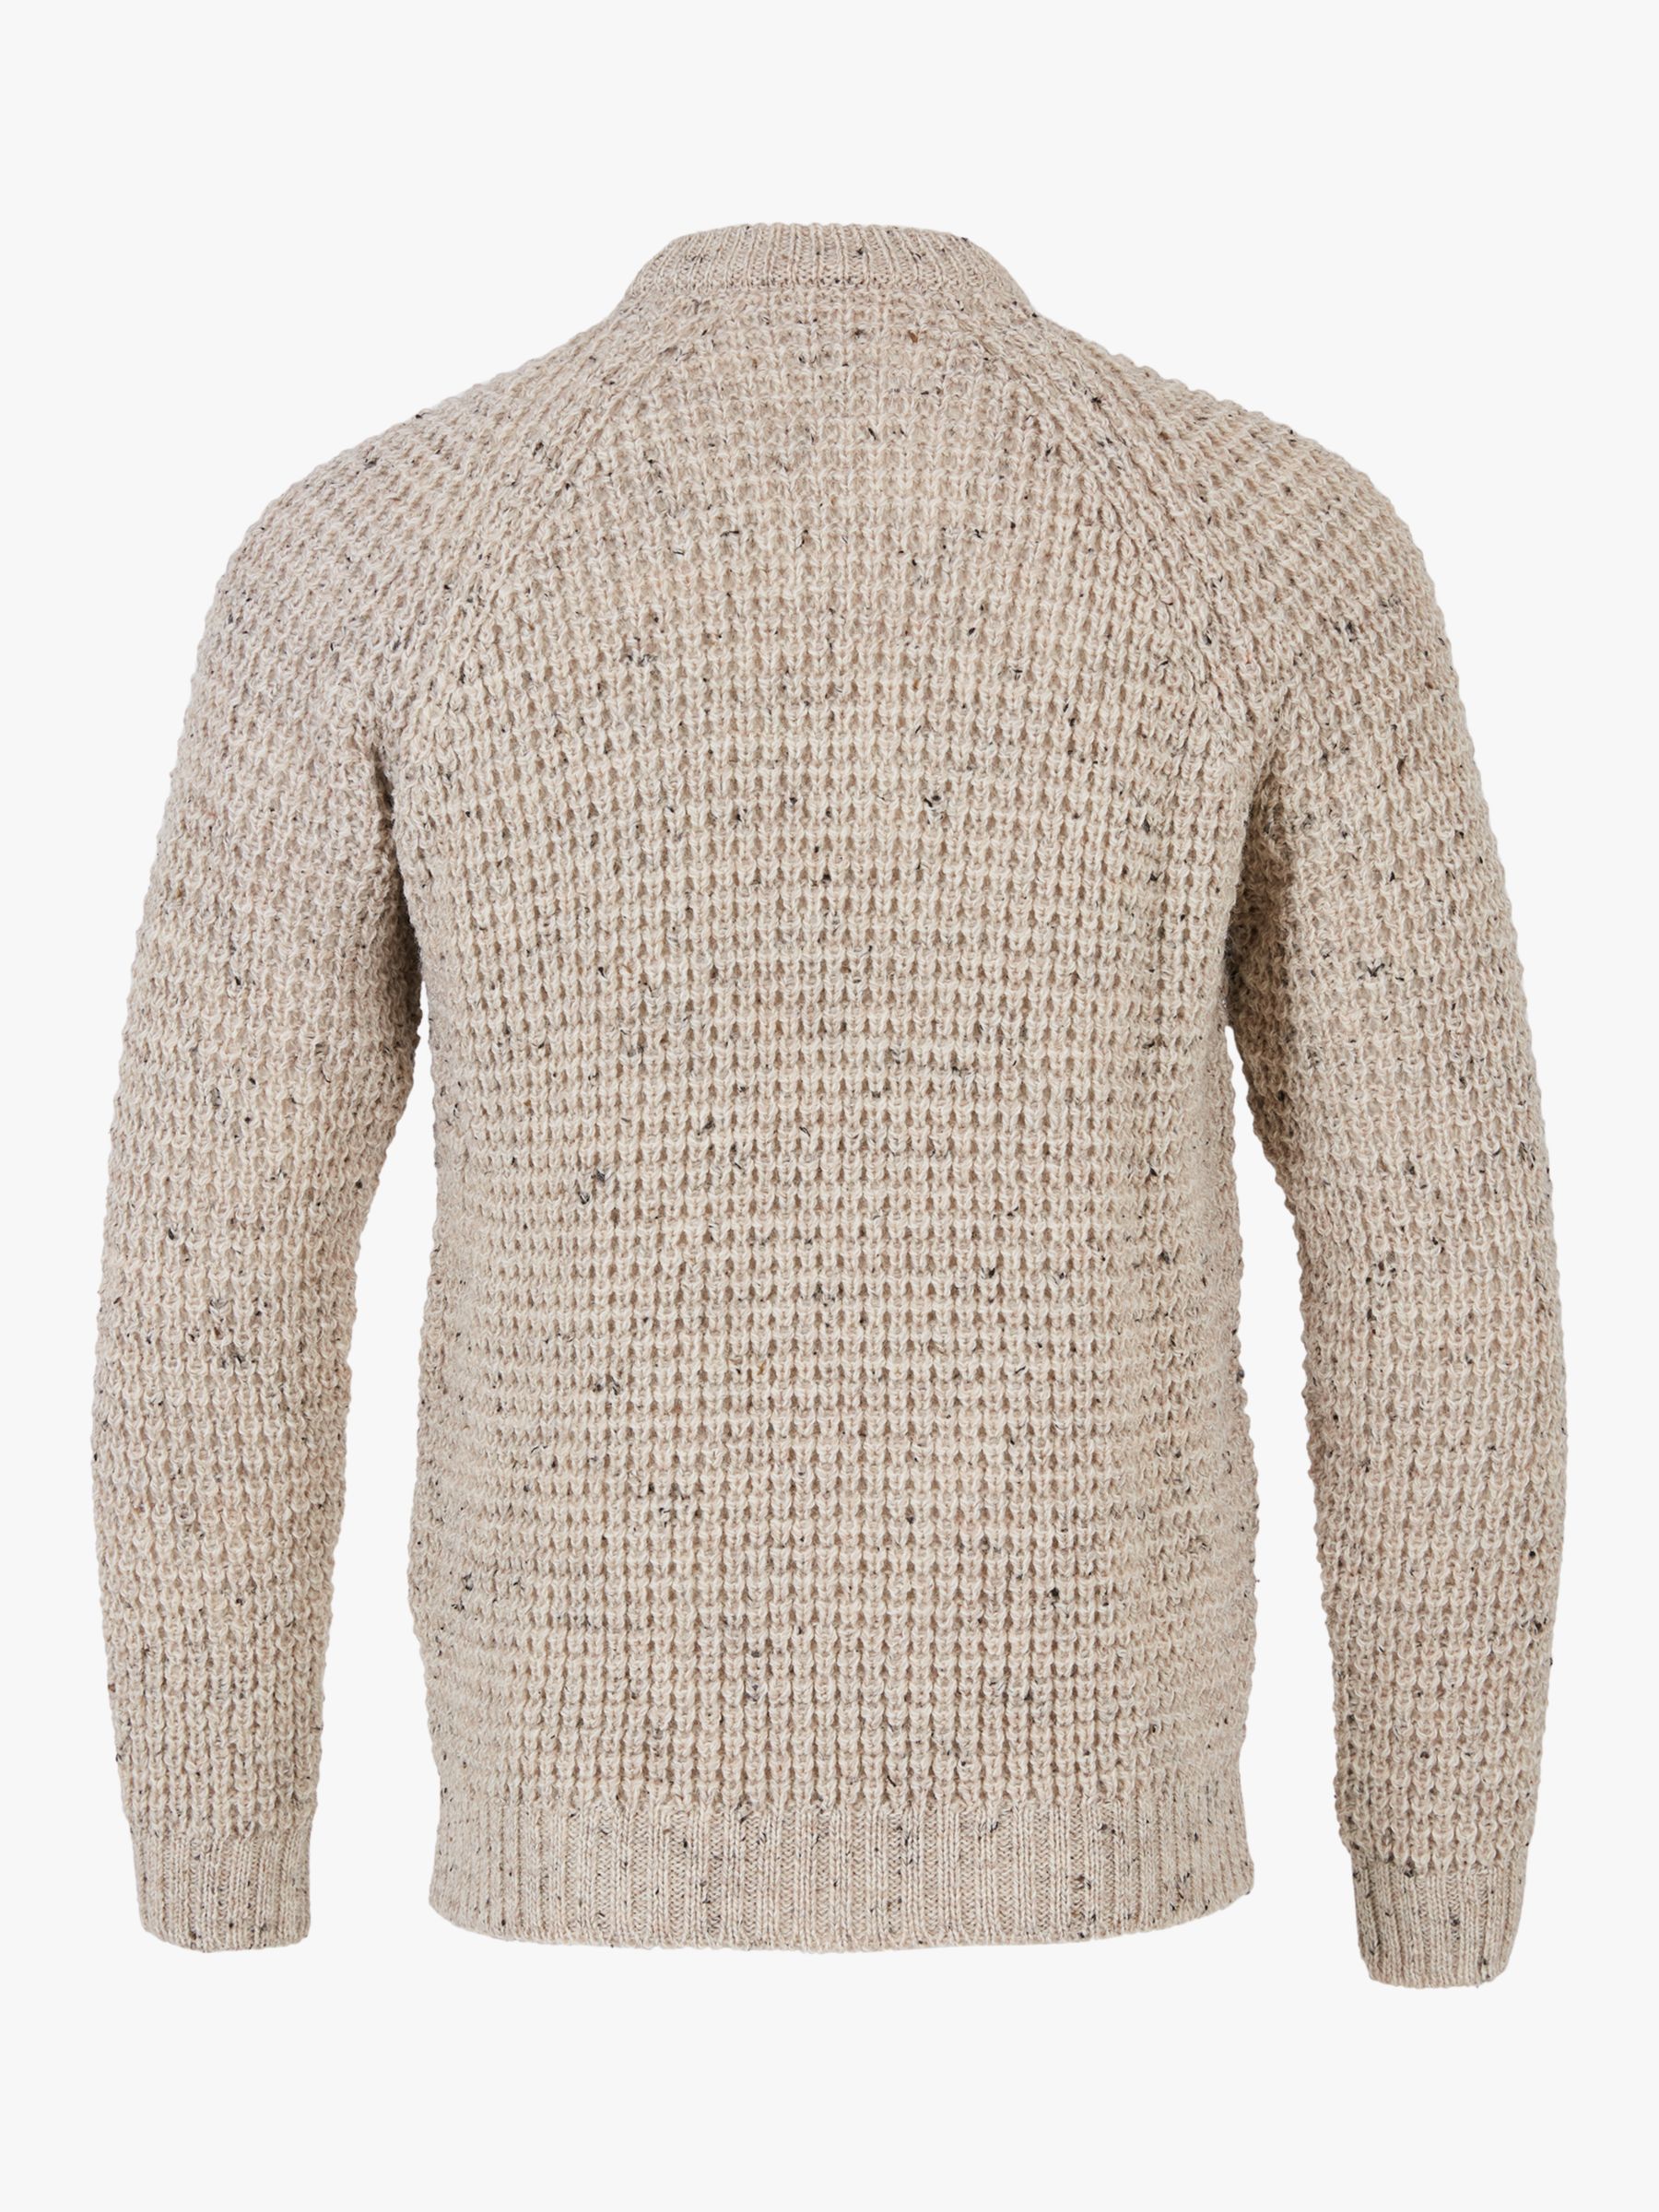 Buy Celtic & Co. Waffle Stitch Crew Jumper, Oatmeal Online at johnlewis.com